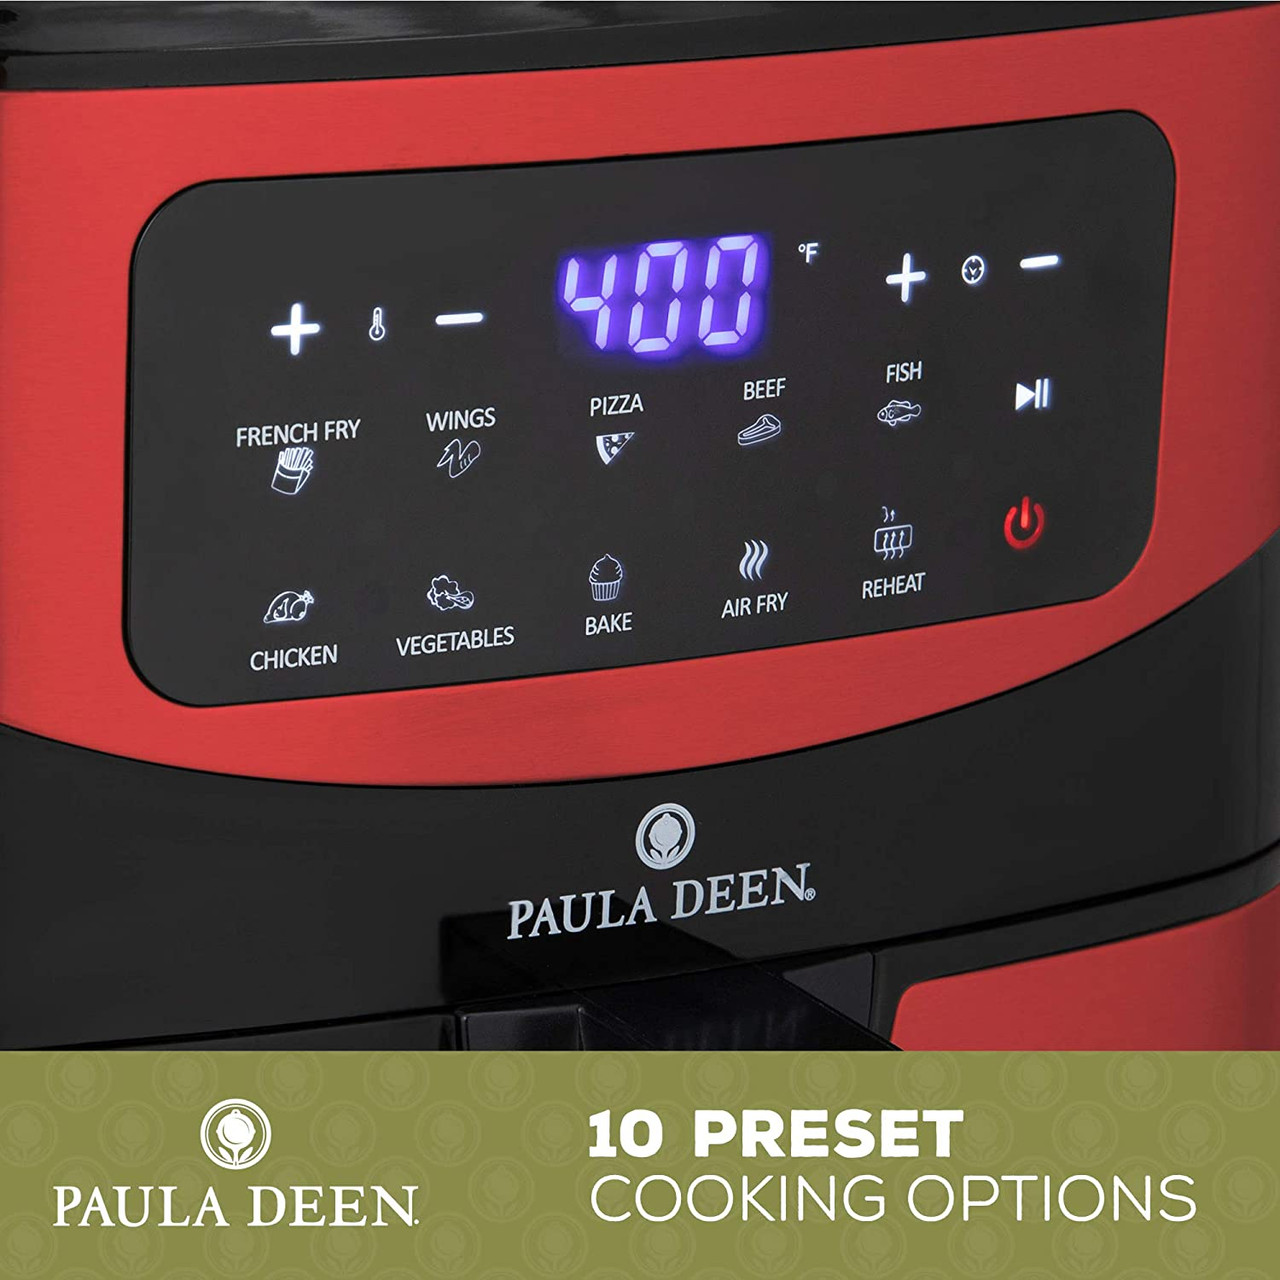 All-New 10-Quart Digital Air Fryer, I've got a treat for y'all! My  brand-new 10-Quart Digital Air Fryer is available for pre-order at  nobodylower.com/pauladeen just in time for holiday